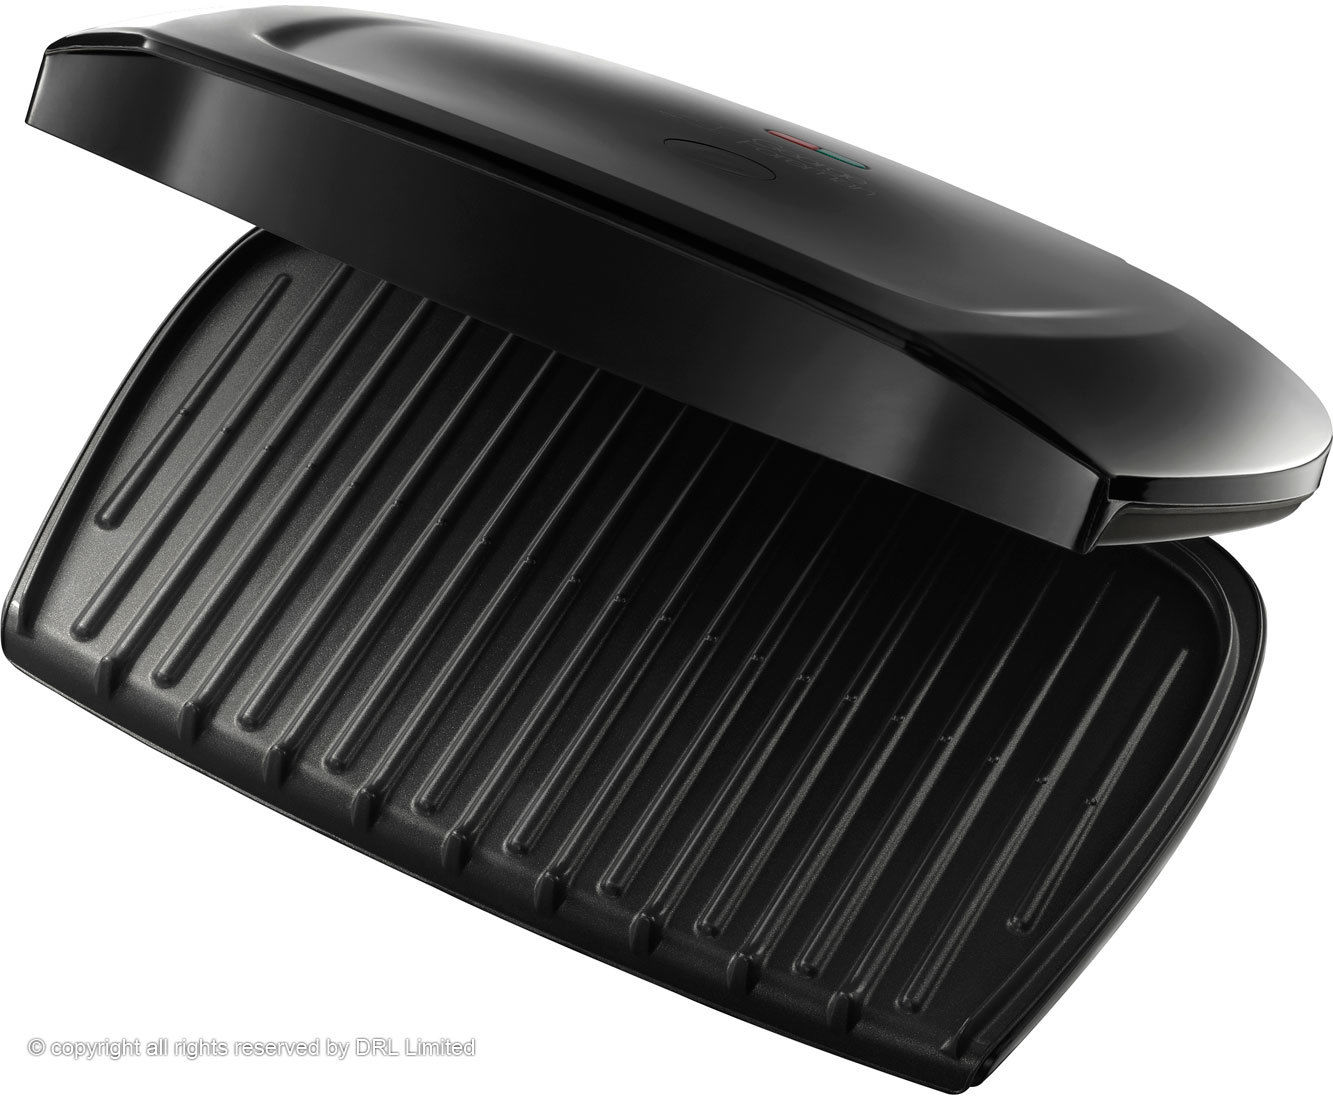 https://www.220stores.com/resize/Shared/Images/Product/George-Foreman-18910-Extra-Large-Grill-220-240-Volt-220v-for-Overseas-Only/18910-4.jpg?